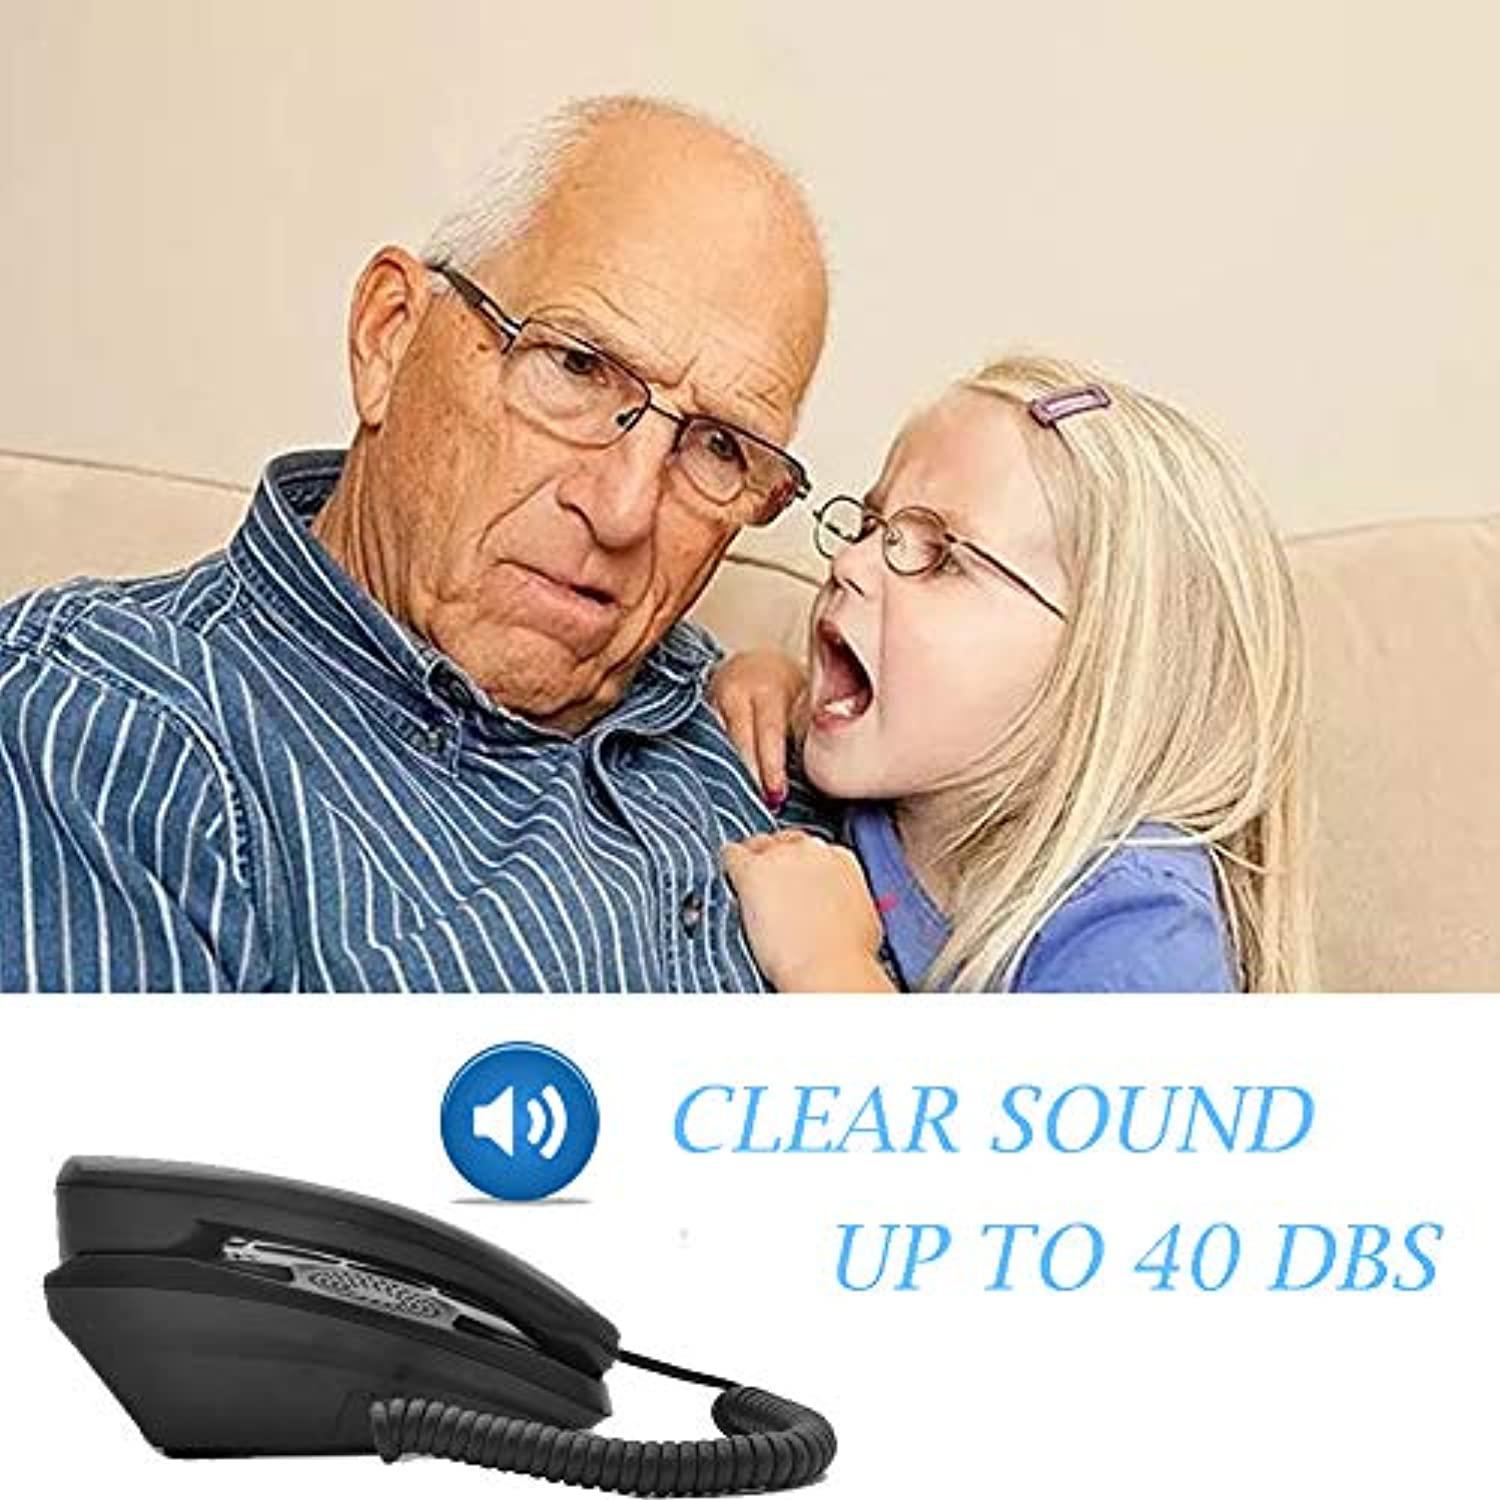 kerlitar big button landline phones for seniors, amplified phone for hearing impaired assist phone for low vision with loud handsfree 